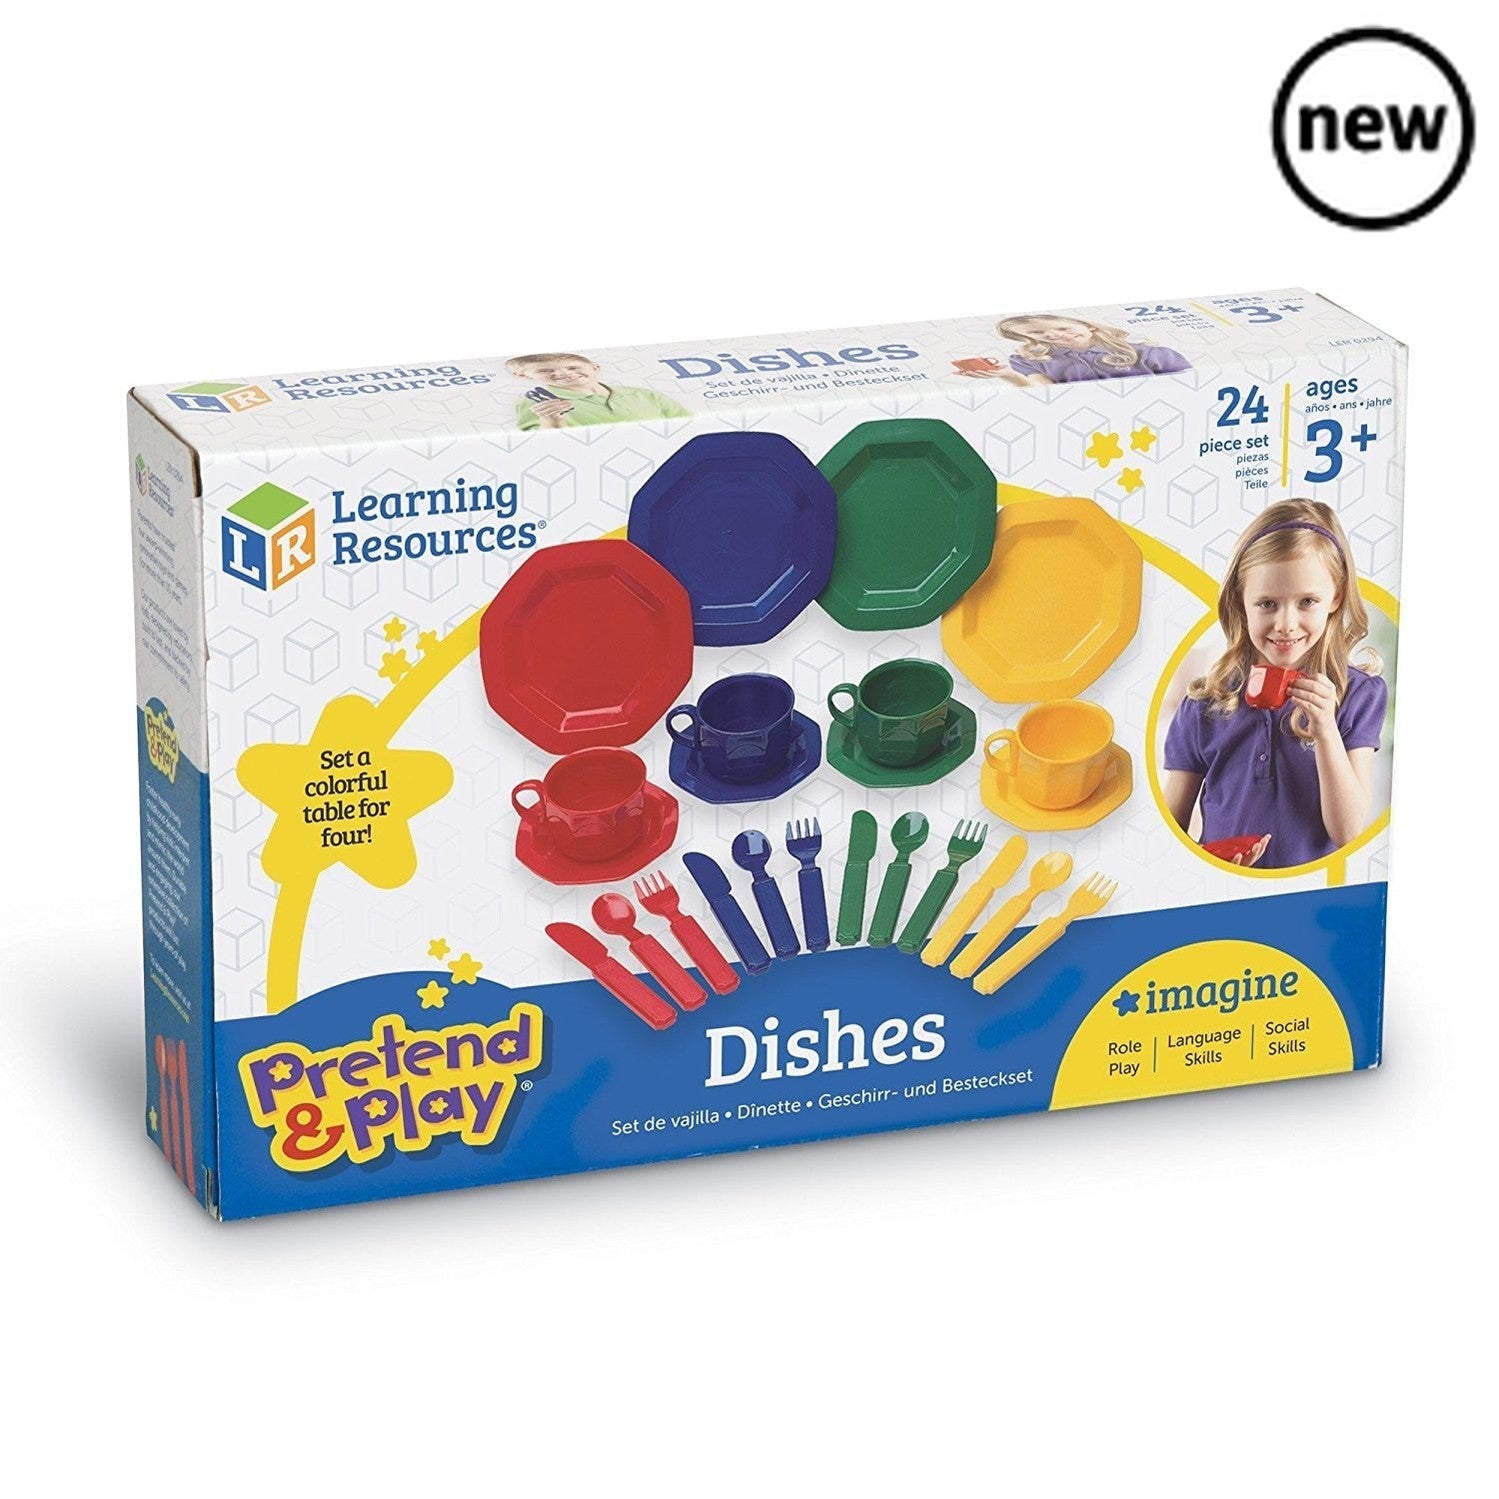 Pretend & Play® Dish Set, The Pretend & Play® Dish Set is a must-have for any imaginative playtime! This colourful and engaging dinner set is designed to enrich the role play experience in a home corner or play kitchen.With its wipe-clean surface, children can pretend to prepare and serve their favorite meals with ease. Imaginative play has never been so much fun! The set includes 24 brightly coloured dinner accessories, including plates, cups, utensils, and more. This comprehensive set allows children to f